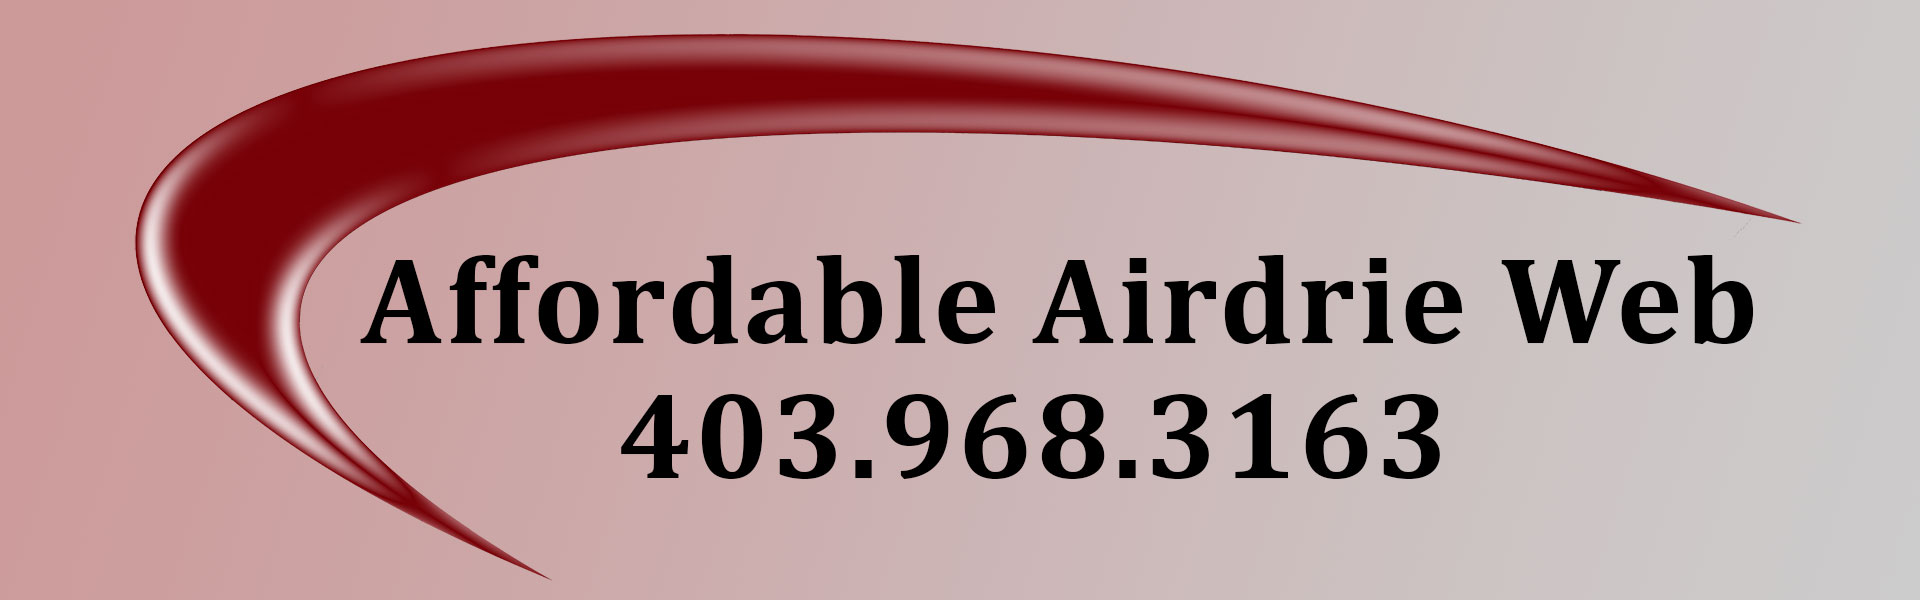 Contact Affordable Airdrie Web for all your web needs in the Calgary, Airdrie and Rocky View County areas of Alberta.